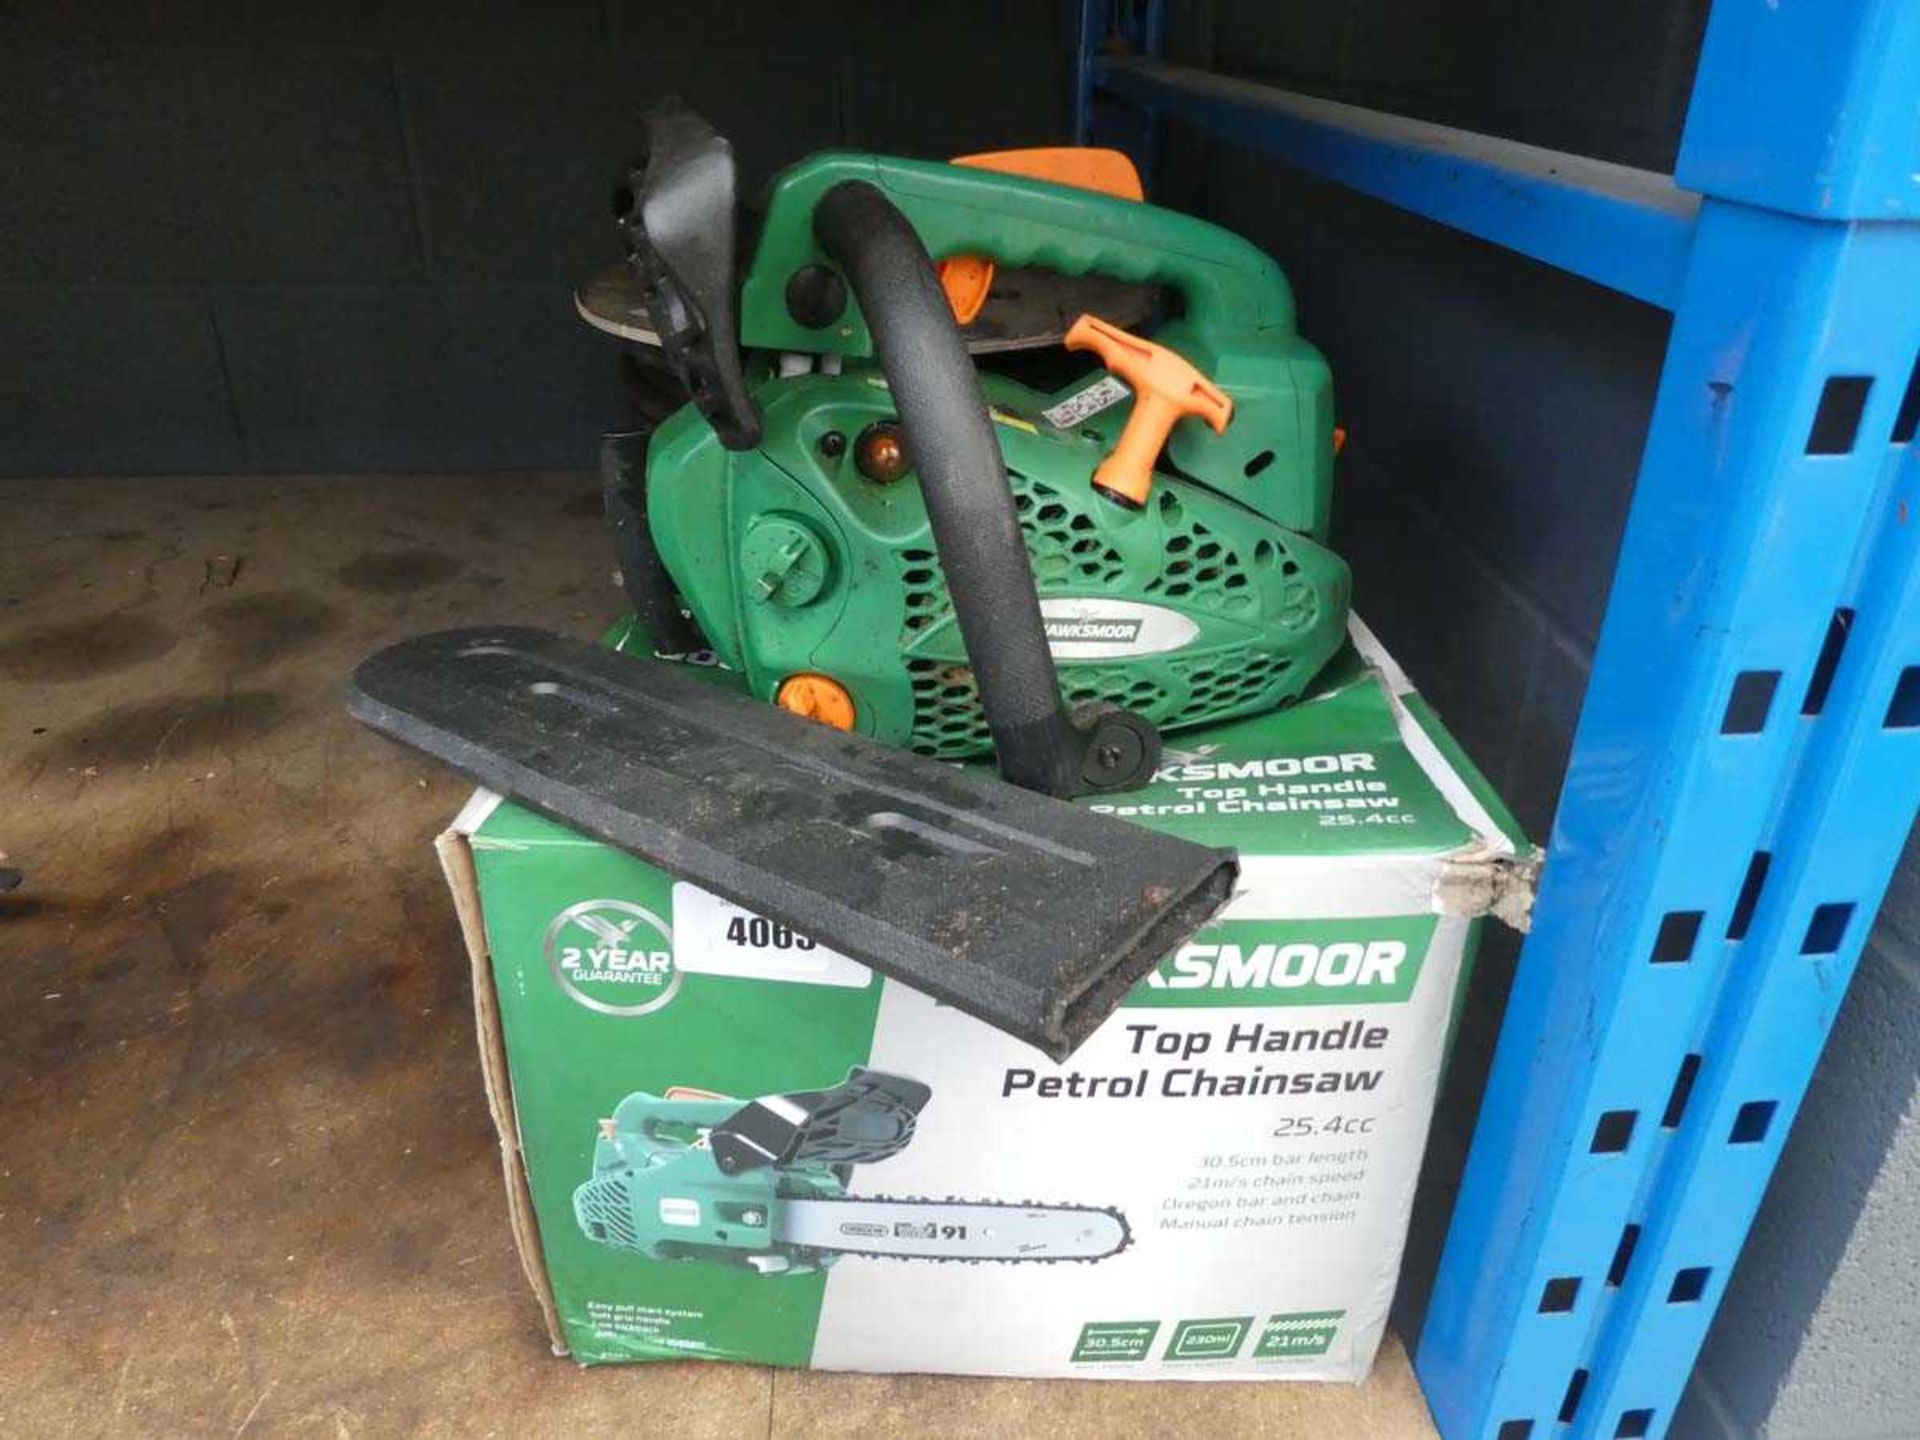 +VAT Small box Hawksmoor chainsaw in flatpack form